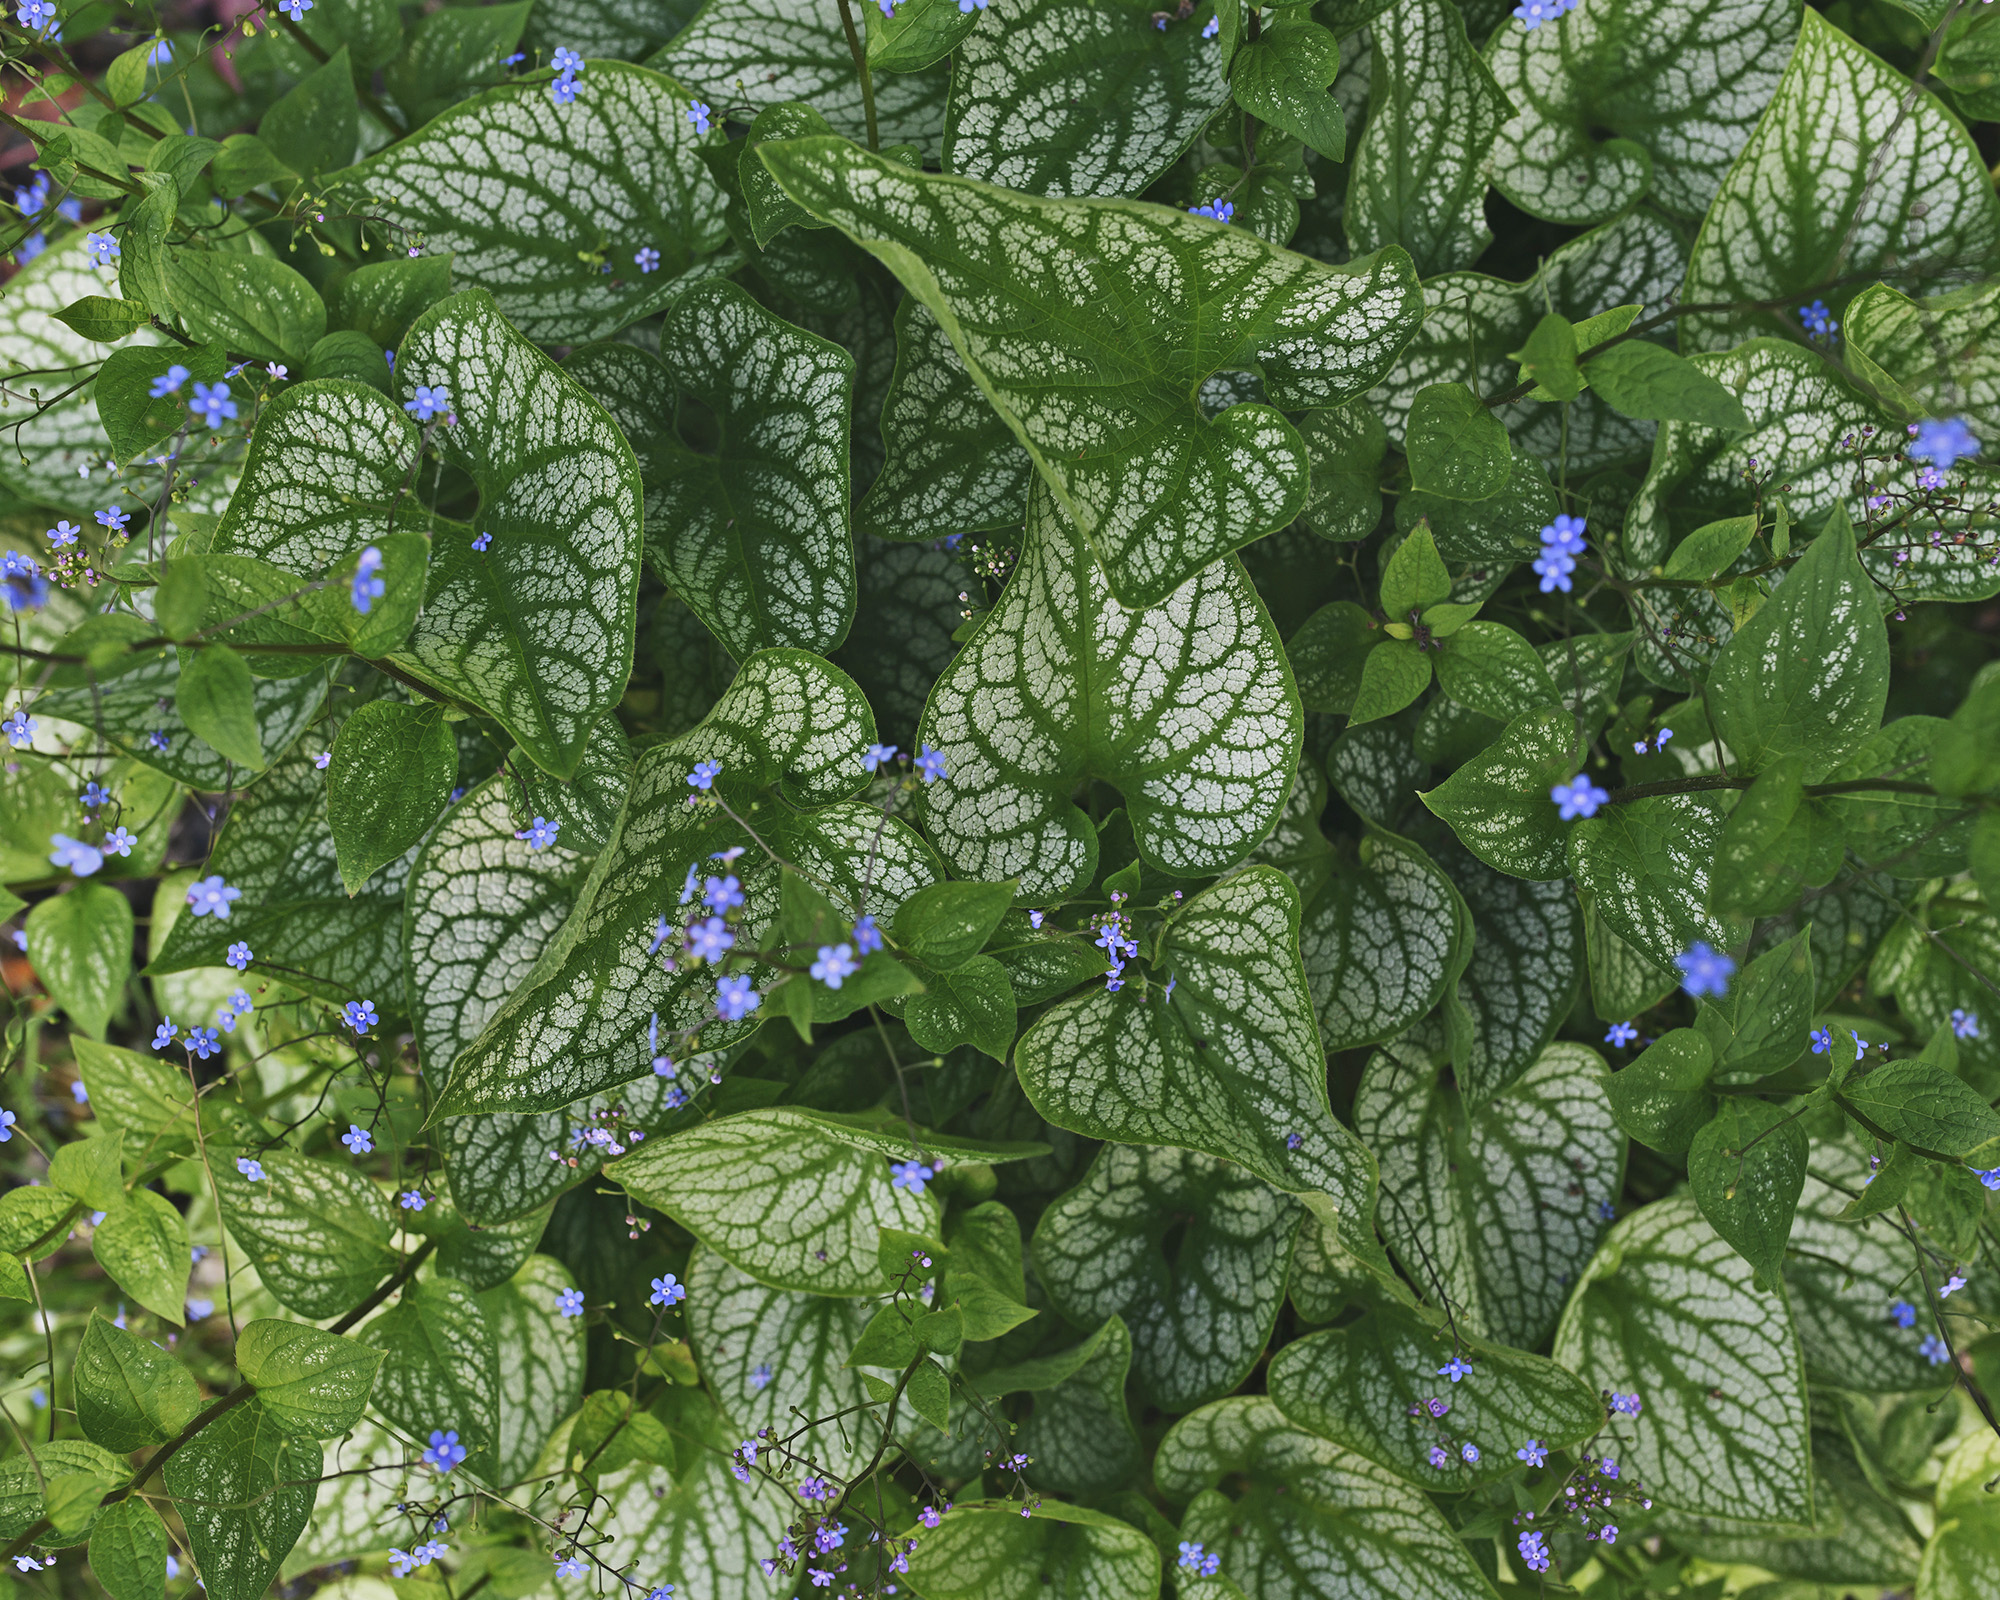 Heartleaf brunnera with small blue flowers